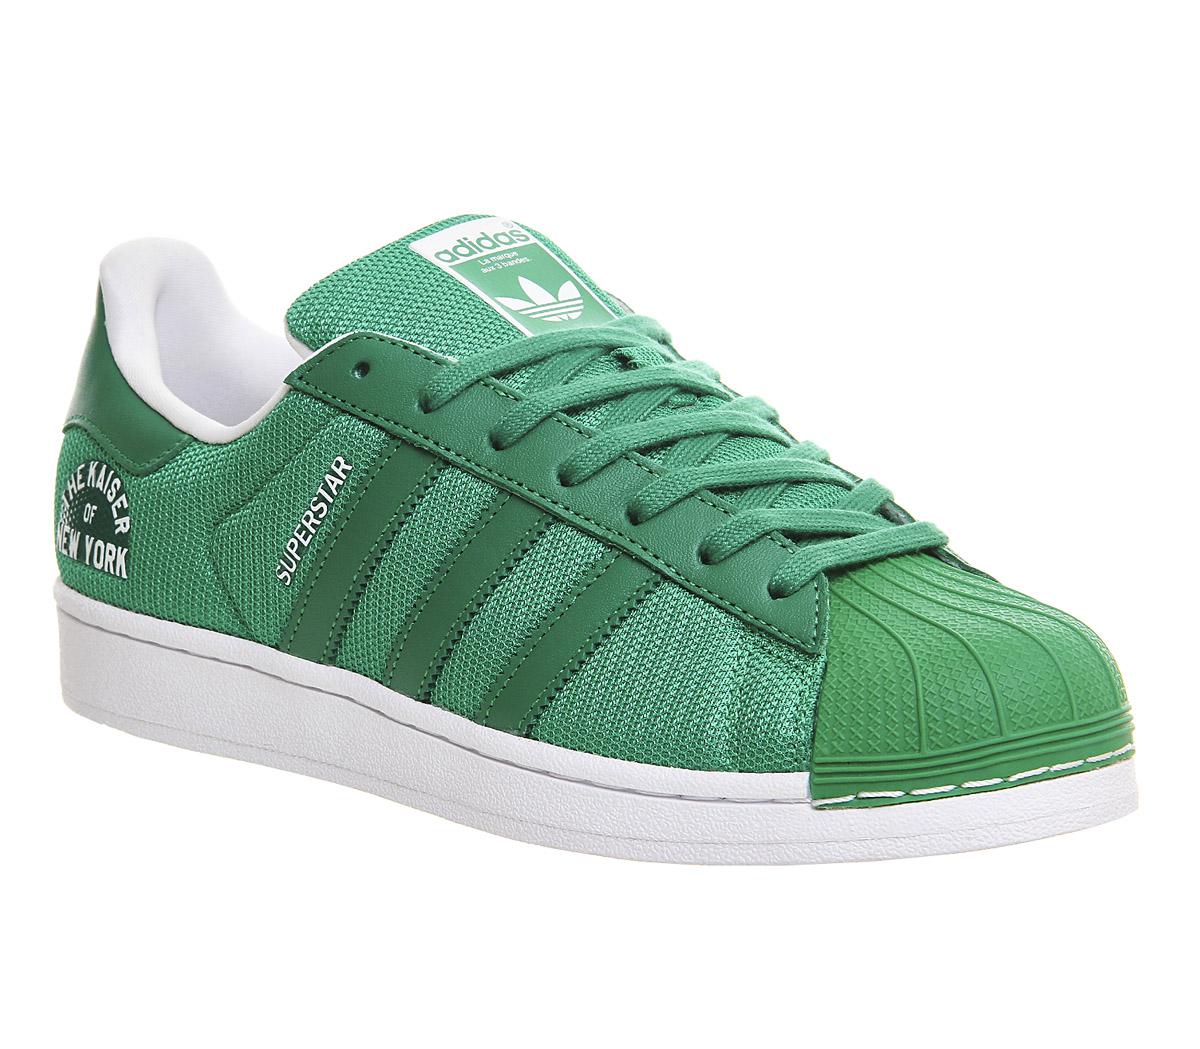 Adidas Superstar Shoes Green Men's Lifestyle Adidas US, 52% OFF